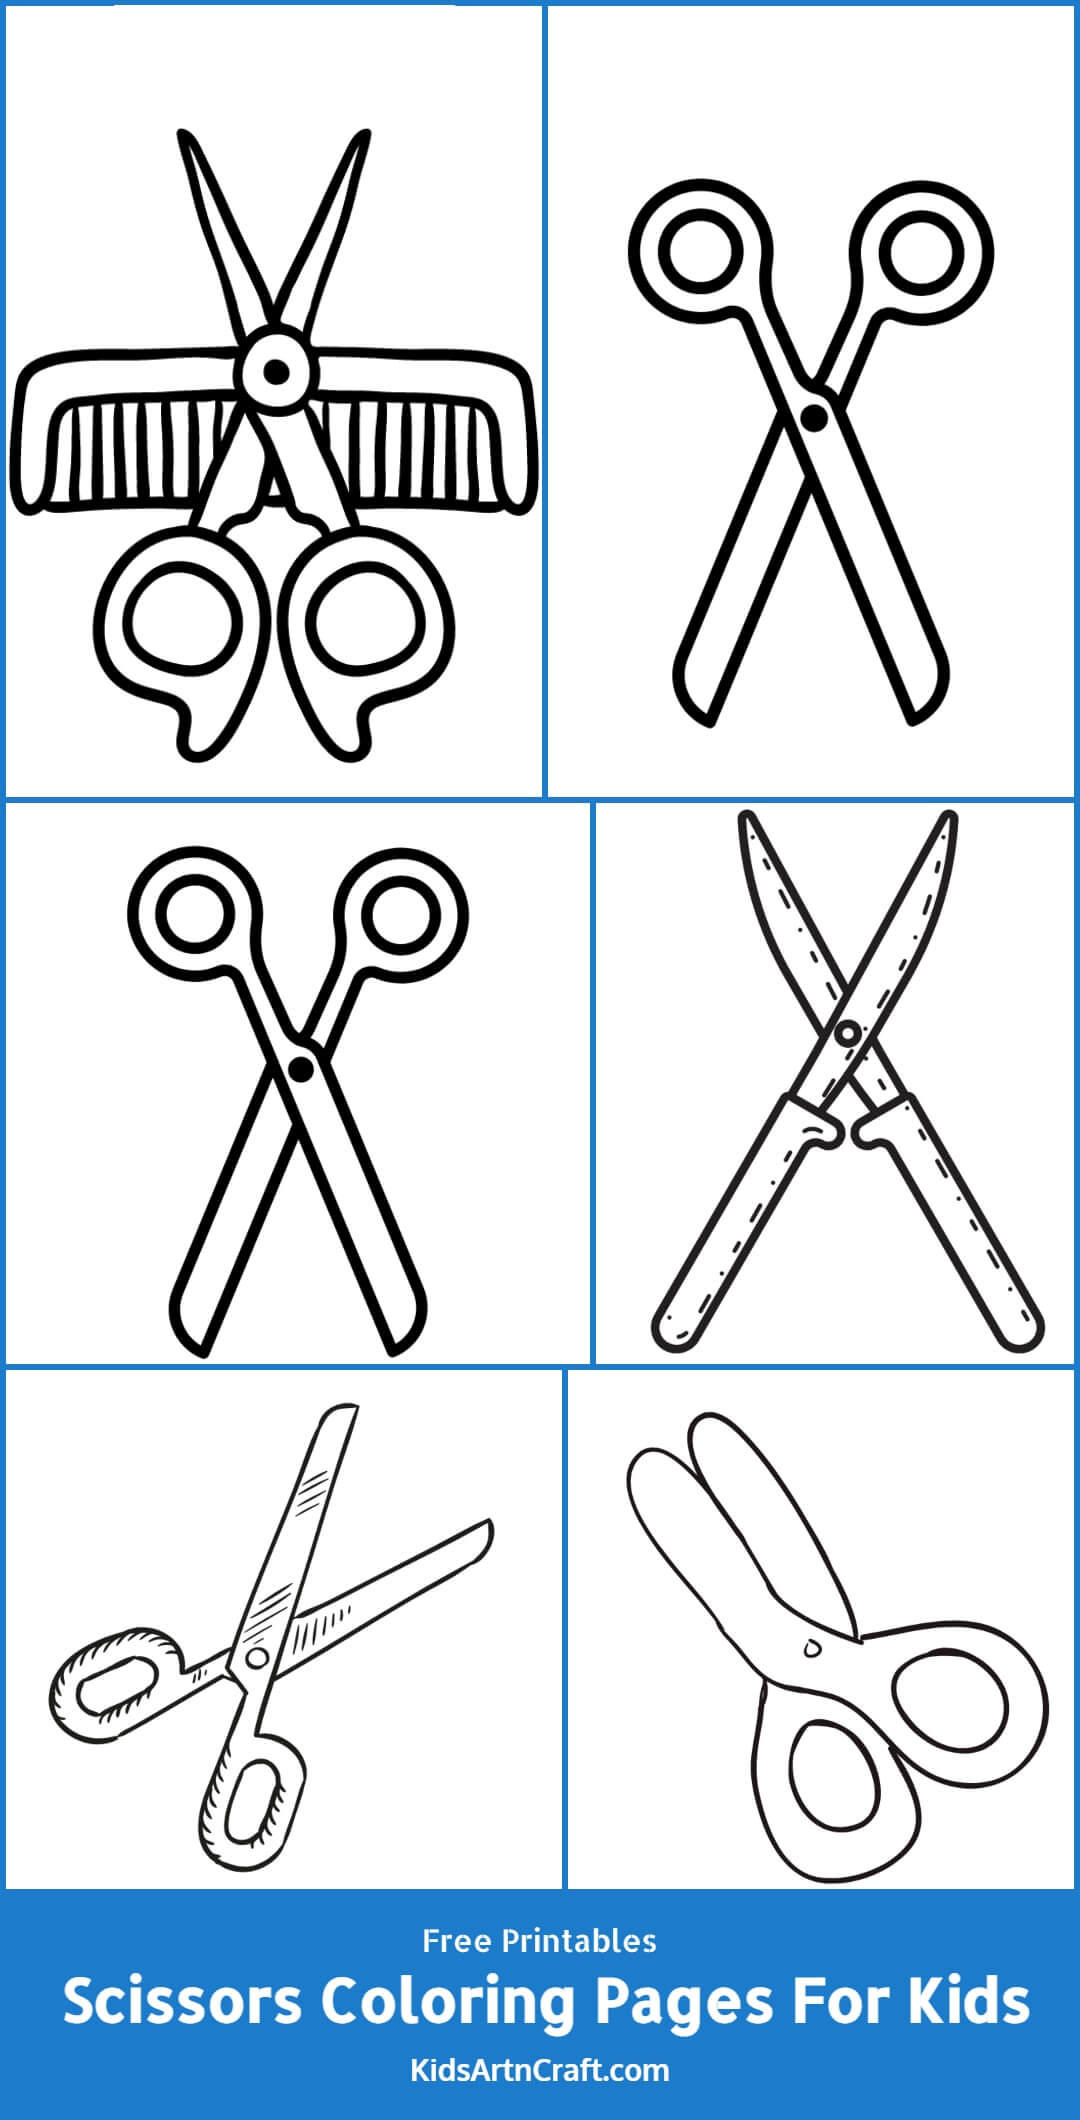 Scissors Coloring Pages For Kids-Free Printable